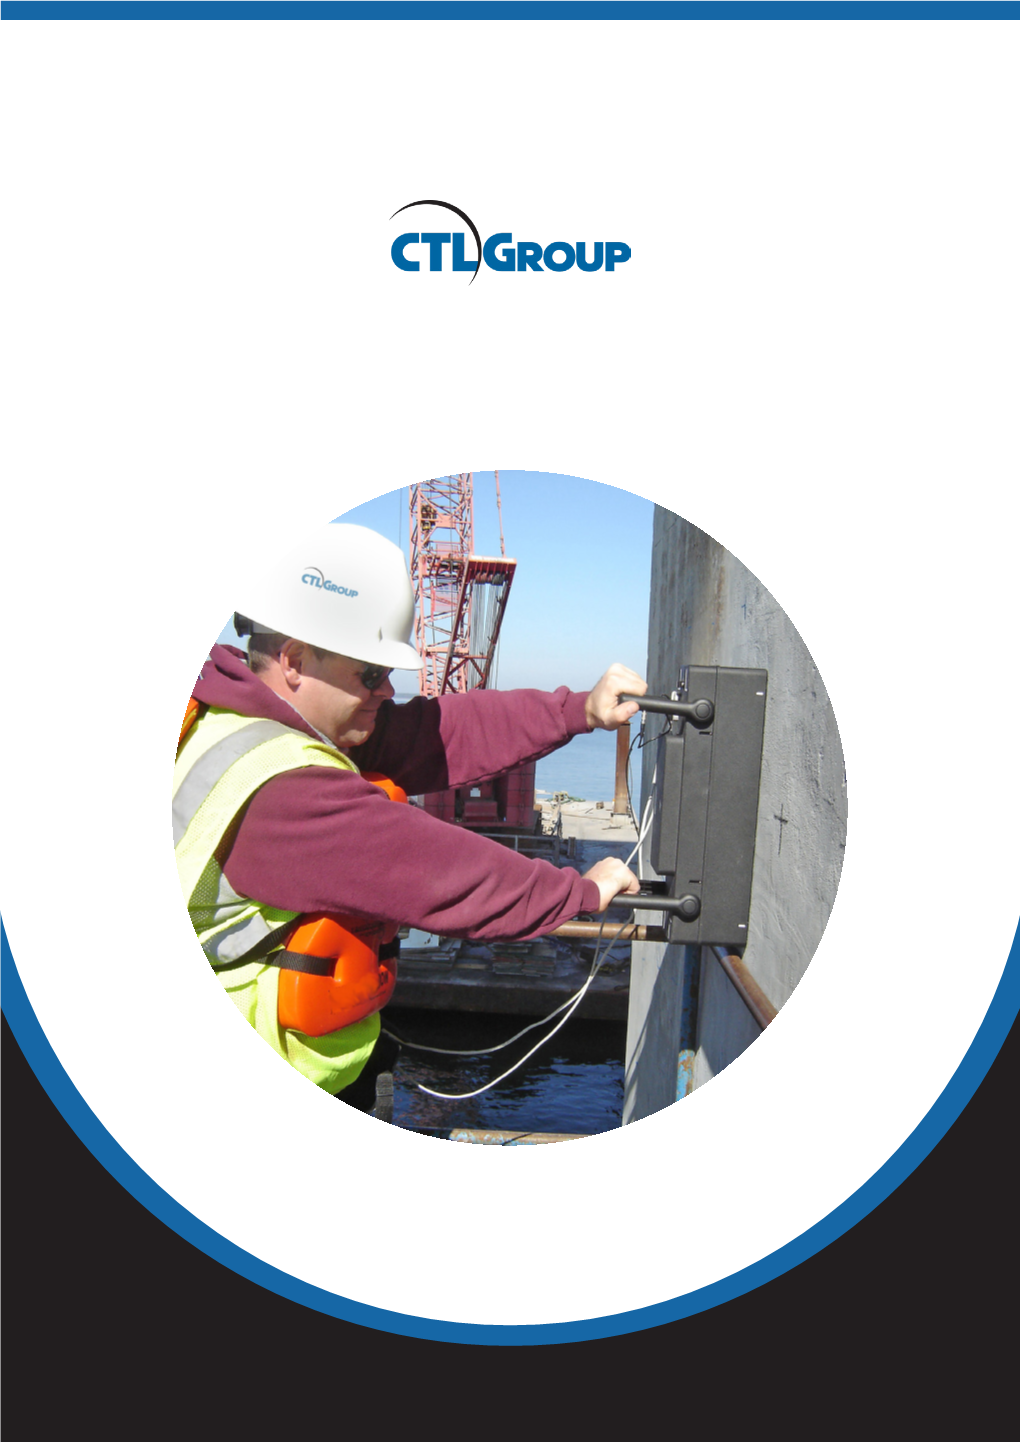 Ctlgroup of Skokie, Illinois Is a Leading Consulting Engineering and Materials Consulting and Testing Firm with a Heritage Spanning More Than One Hundred Years